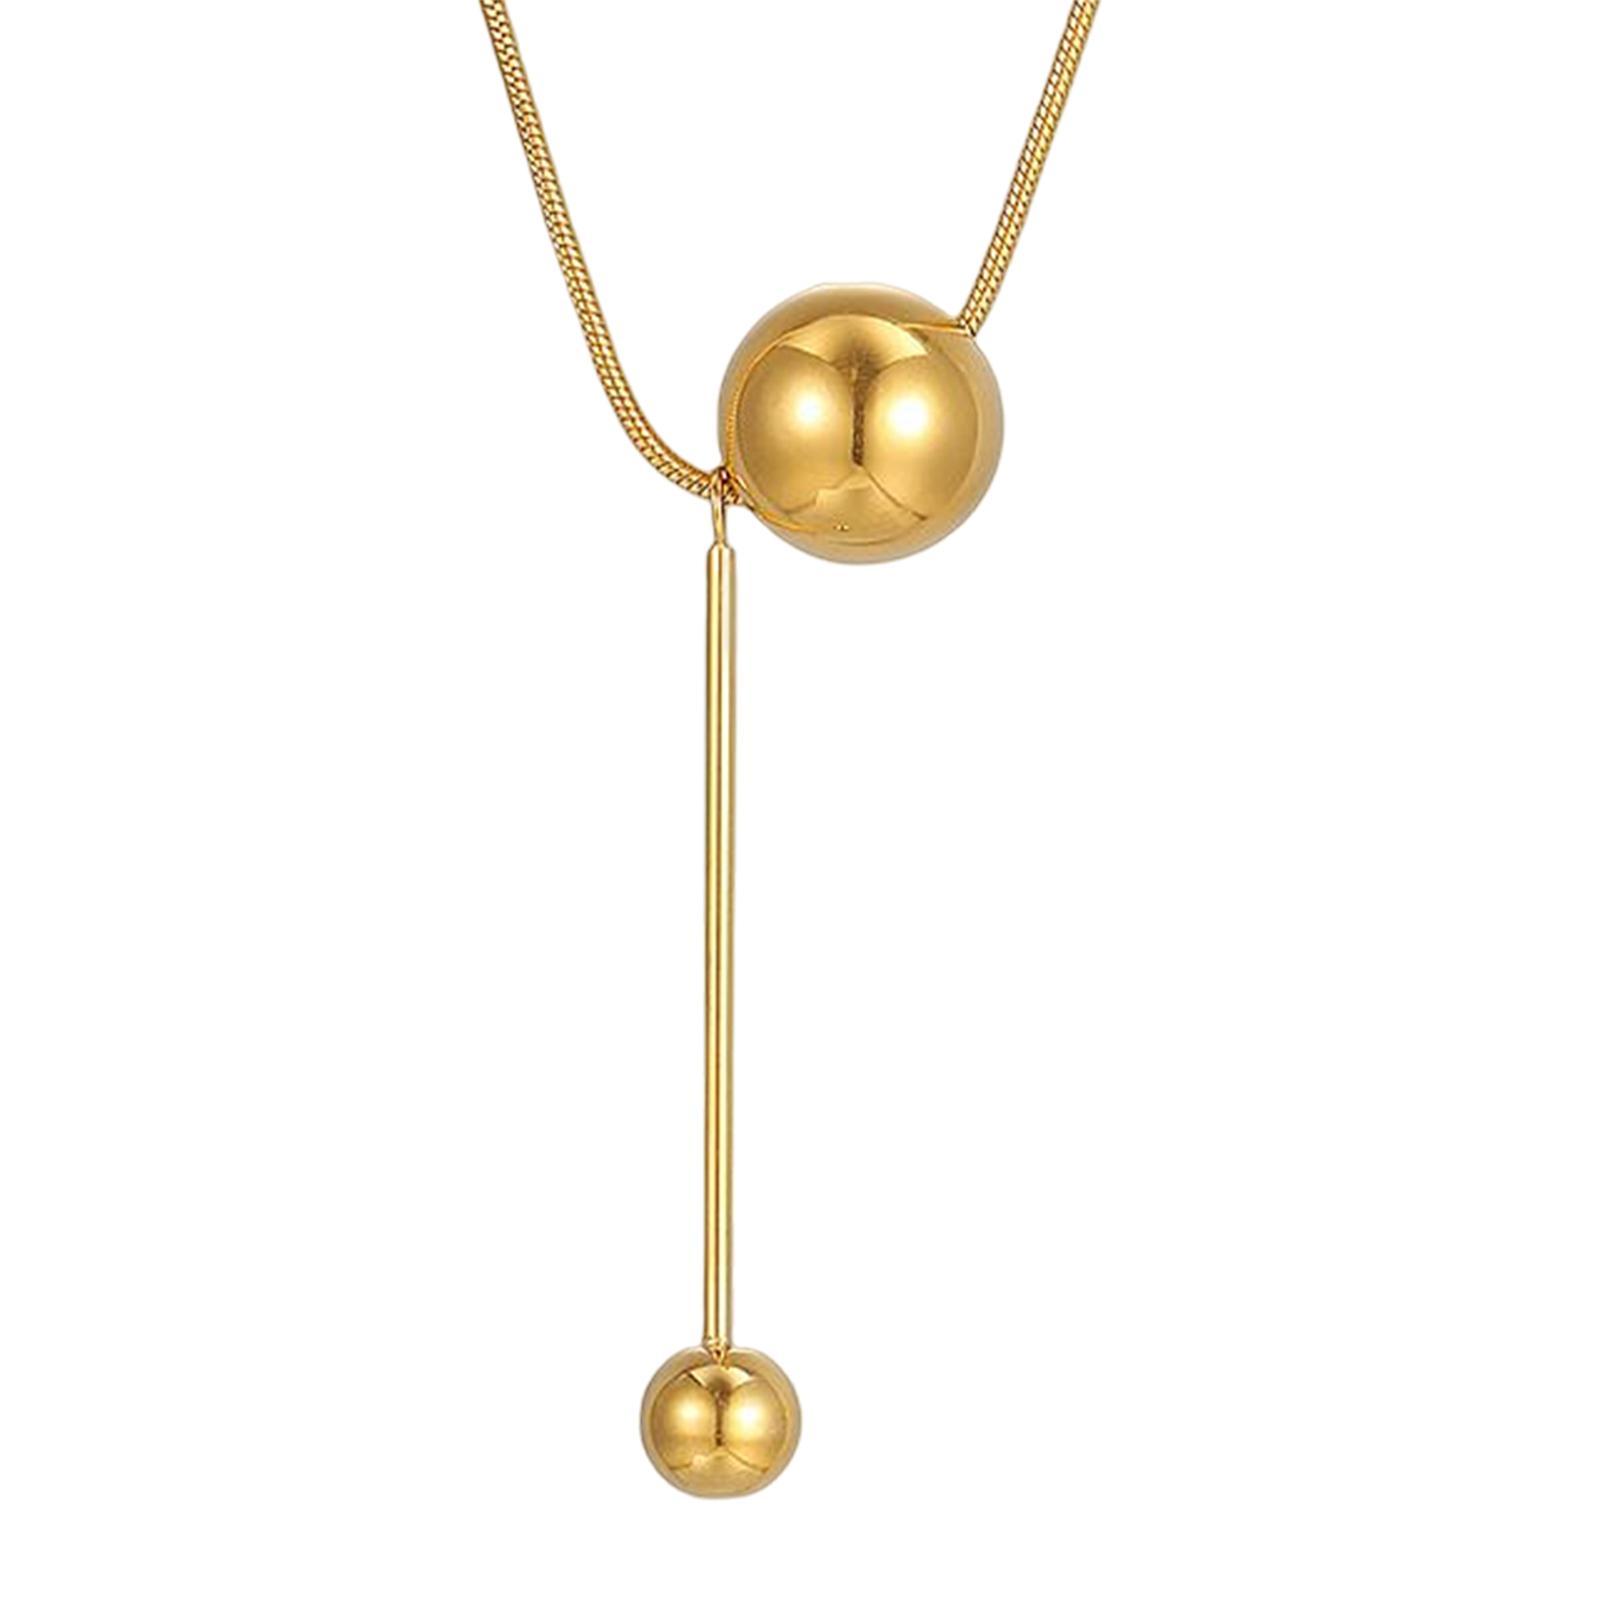 Ball Pendant Necklace Creative Choker Necklace for Daily Wear